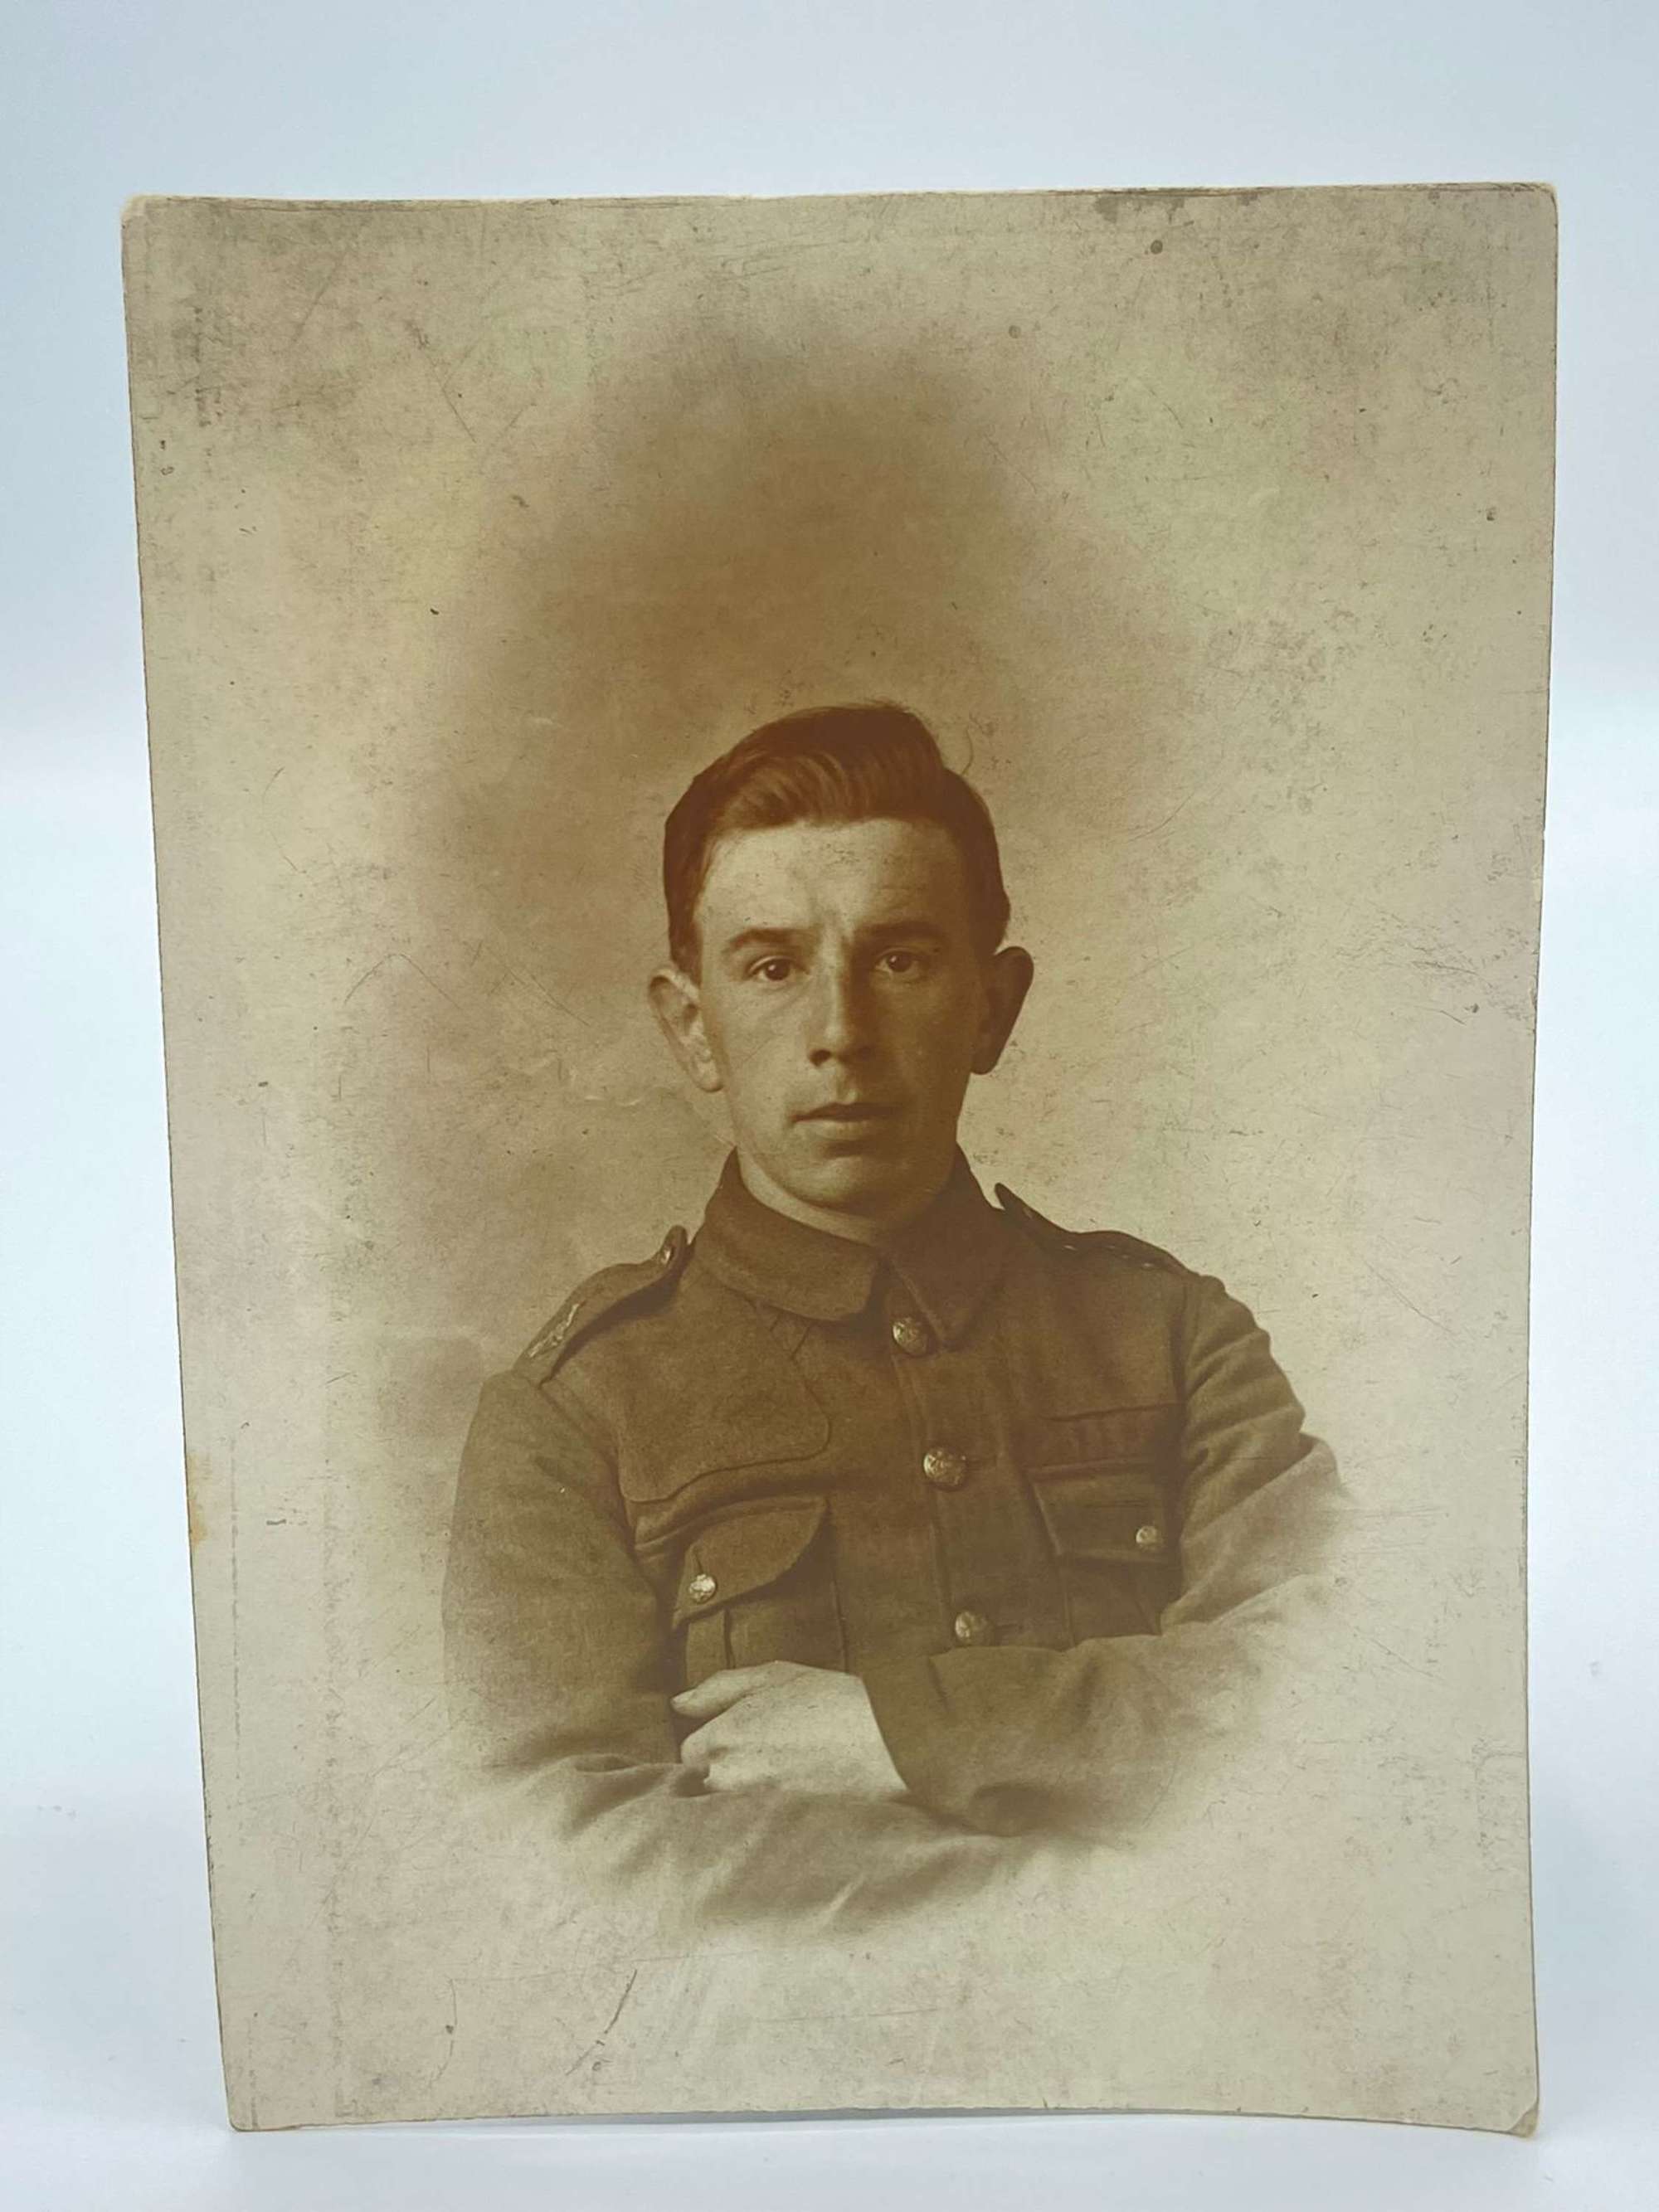 WW1 British Army General Service Young Soldier Portrait Photograph